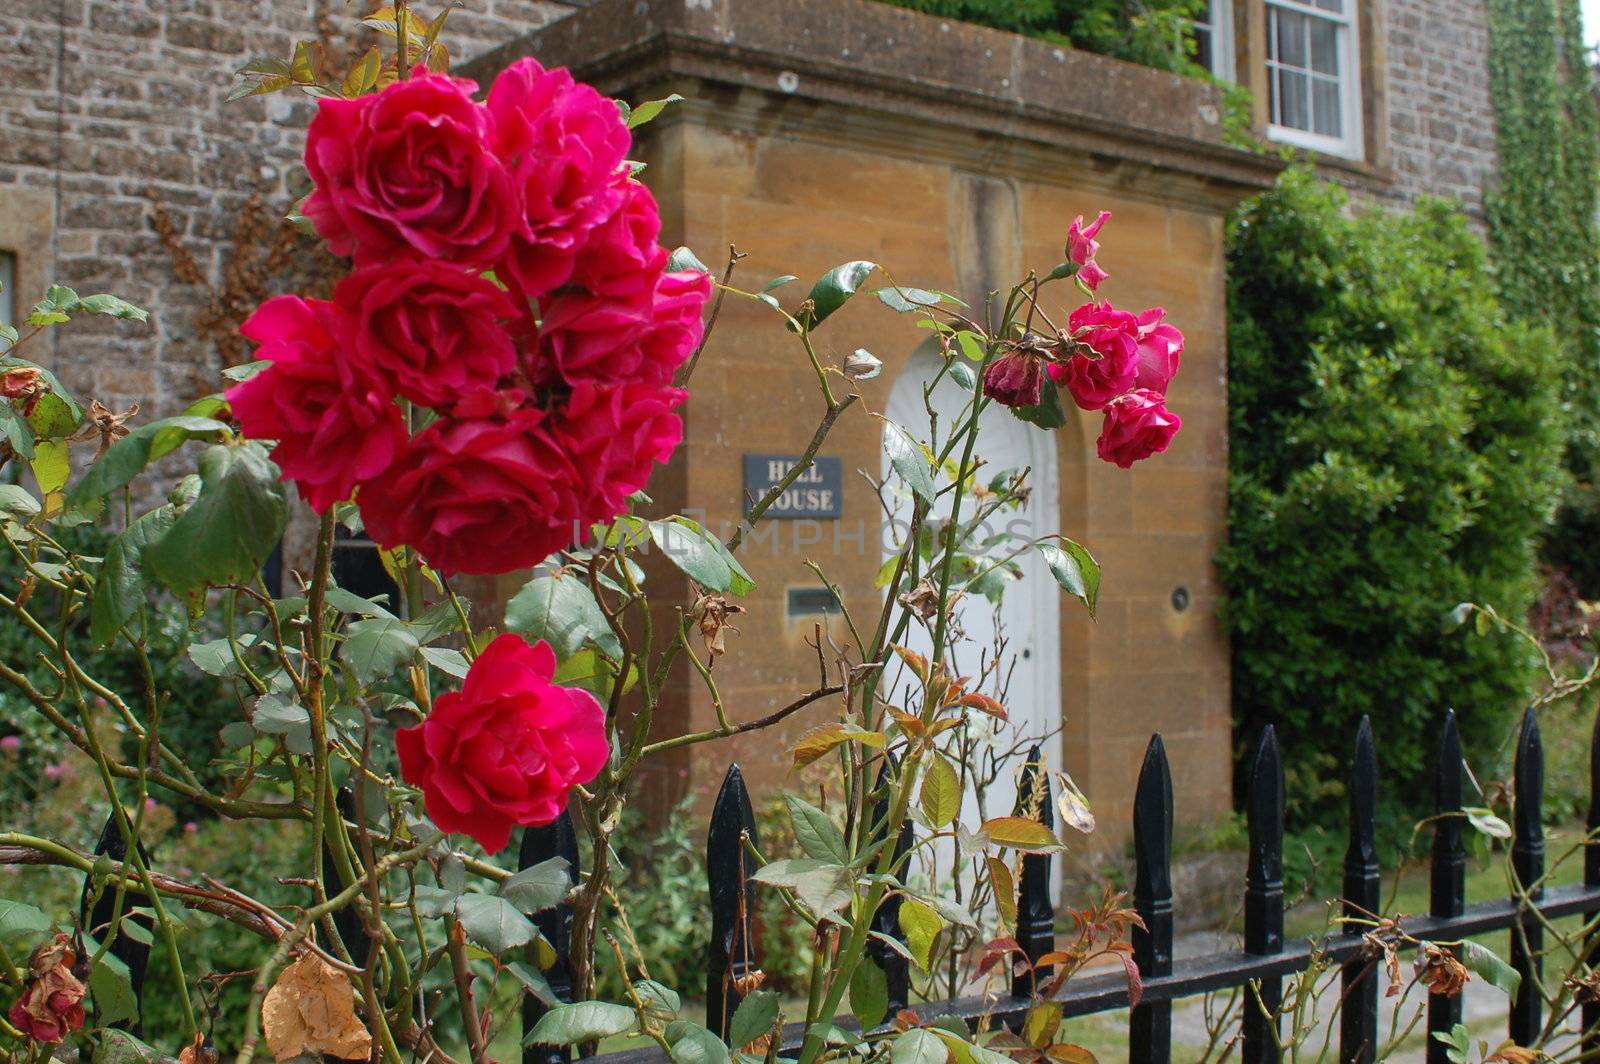 View of a typical British country lane with roses in the foreground and a country house in the background, framed by an iron railing